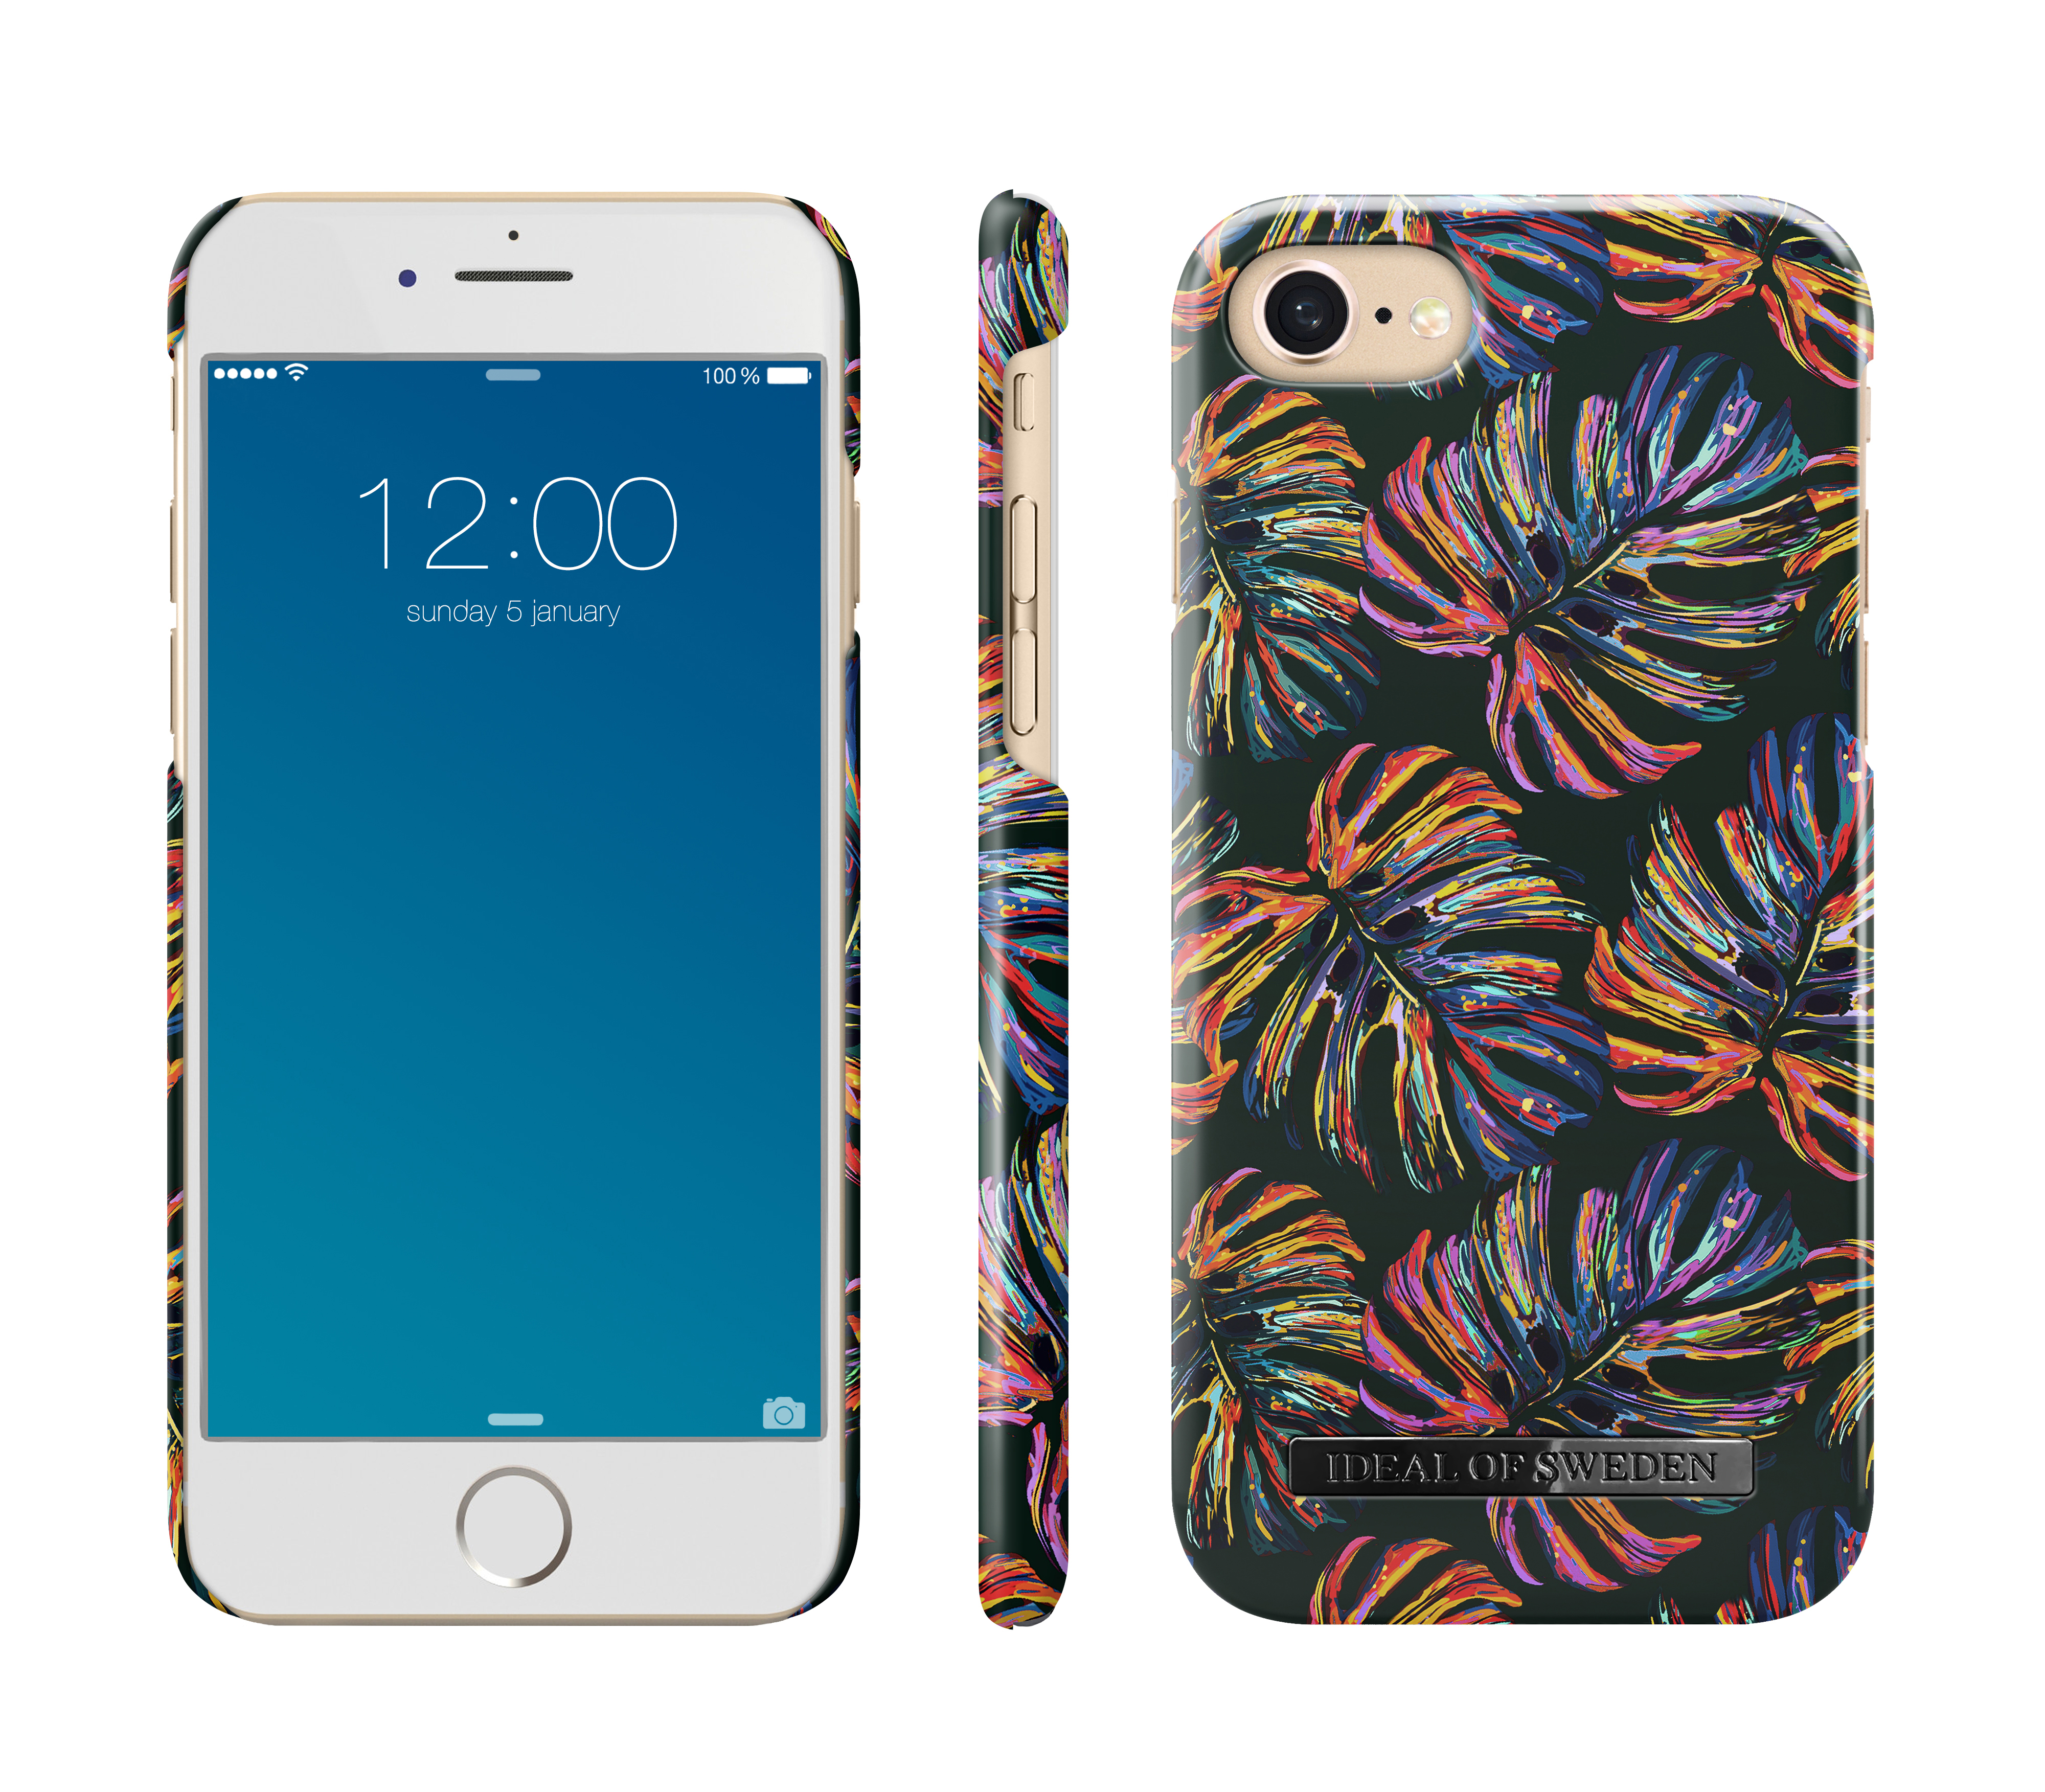 Apple, Neon Backcover, SWEDEN iPhone IDEAL Tropical 7, Fashion, OF